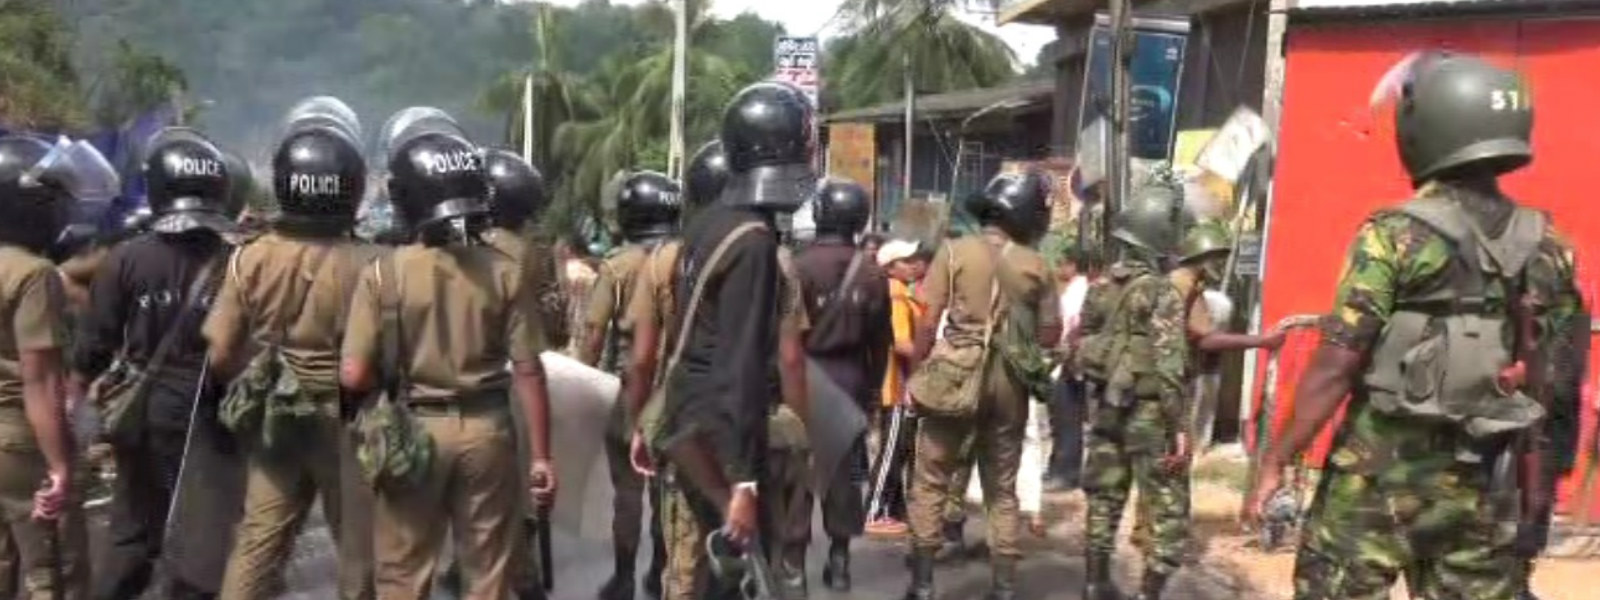 27 linked to Kandy unrest further remanded